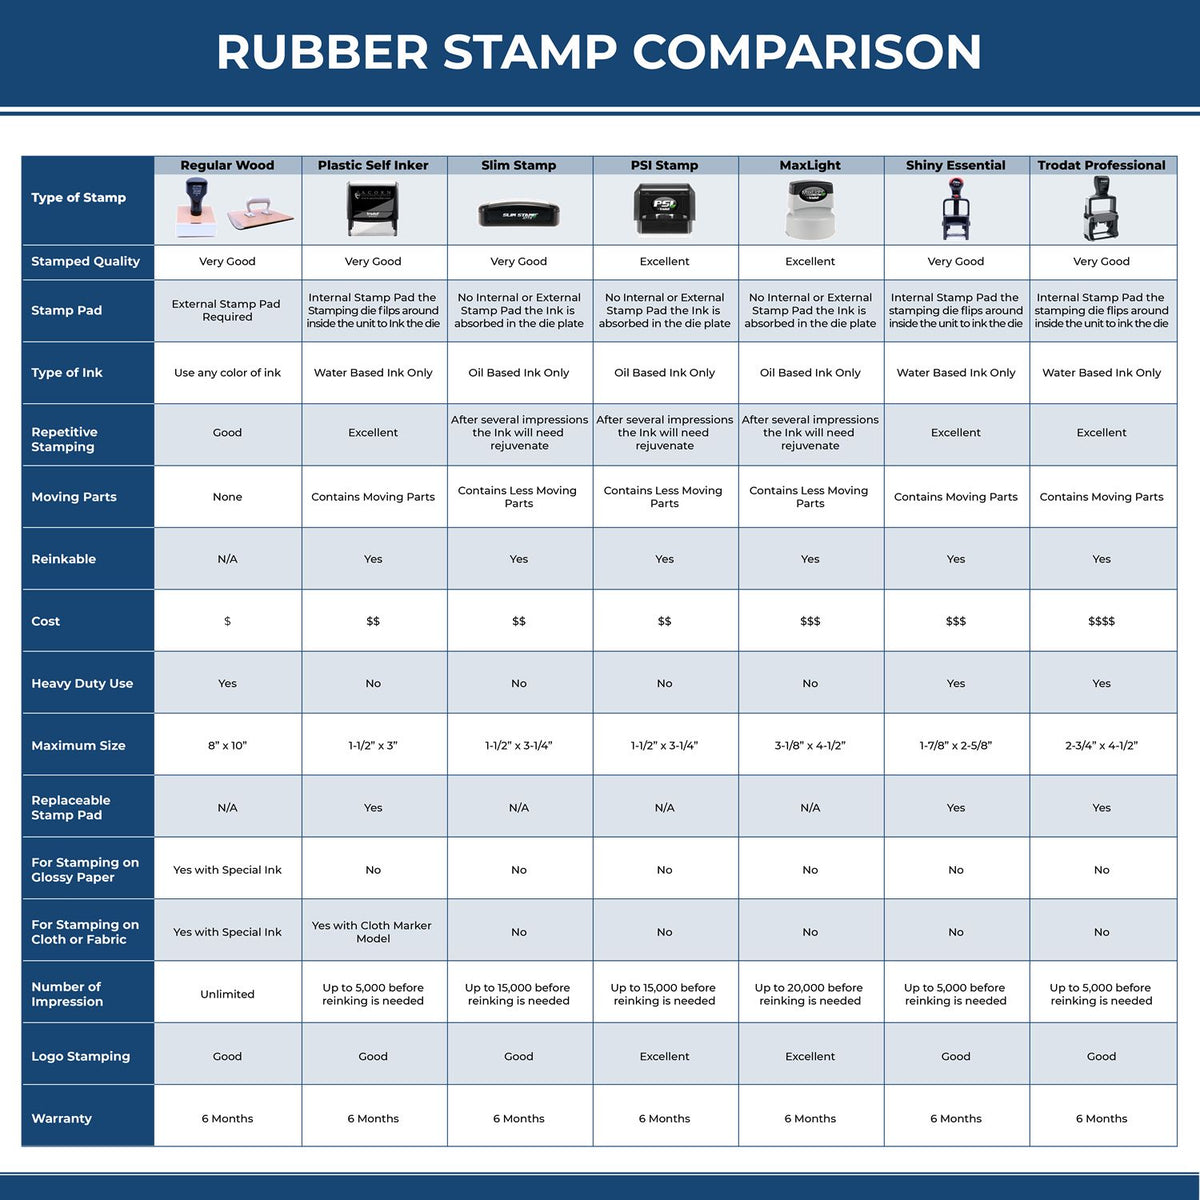 A comparison chart for the different types of mount models available for the Wooden Handle Missouri Rectangular Notary Public Stamp.